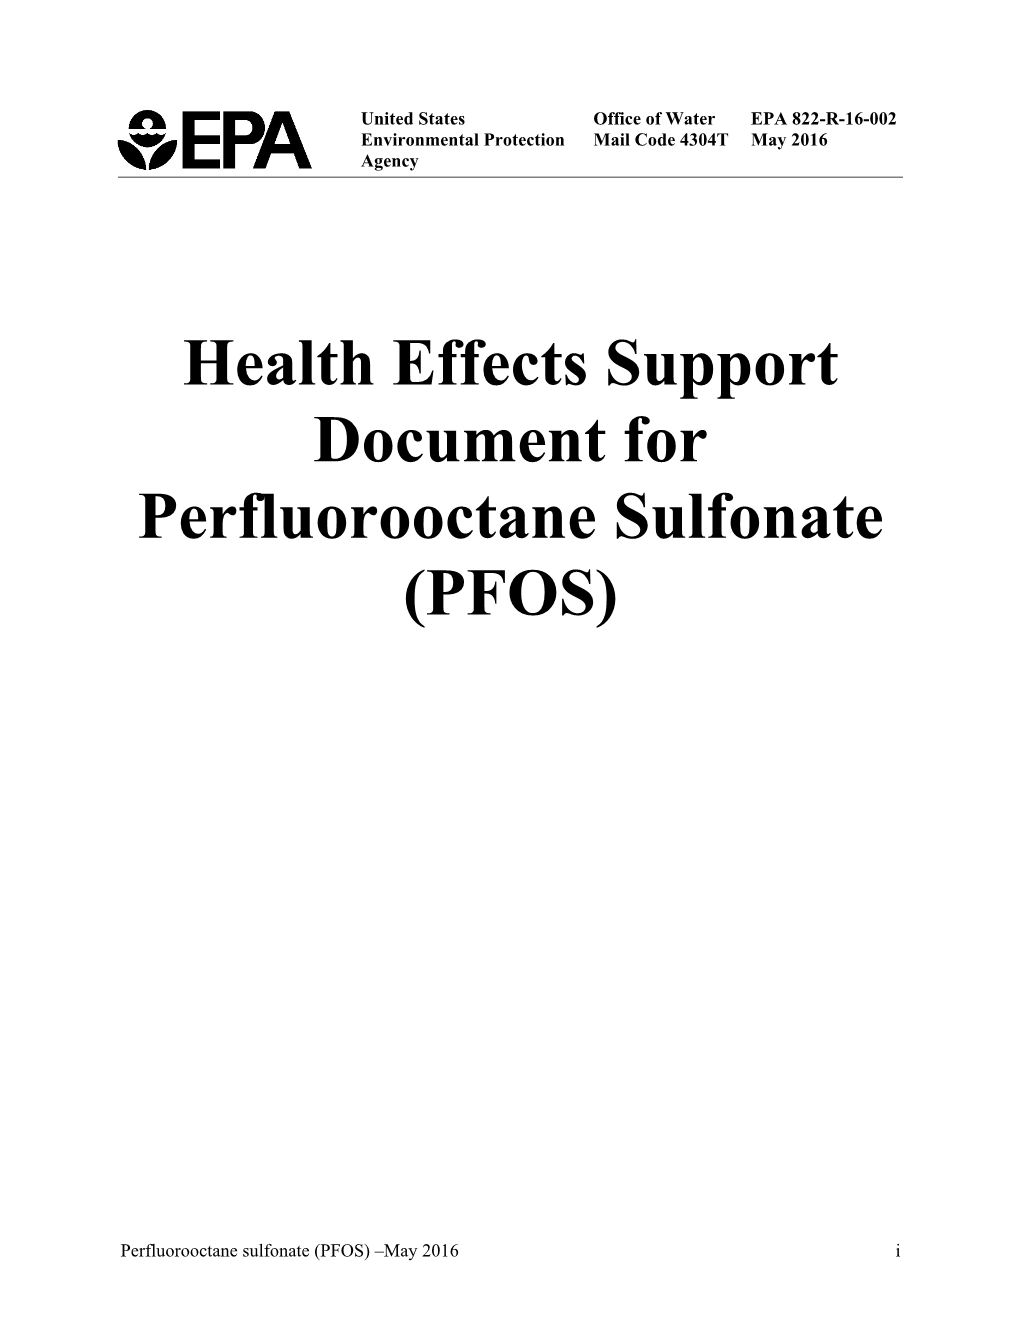 Health Effects Support Document for Perfluorooctane Sulfonate (PFOS)